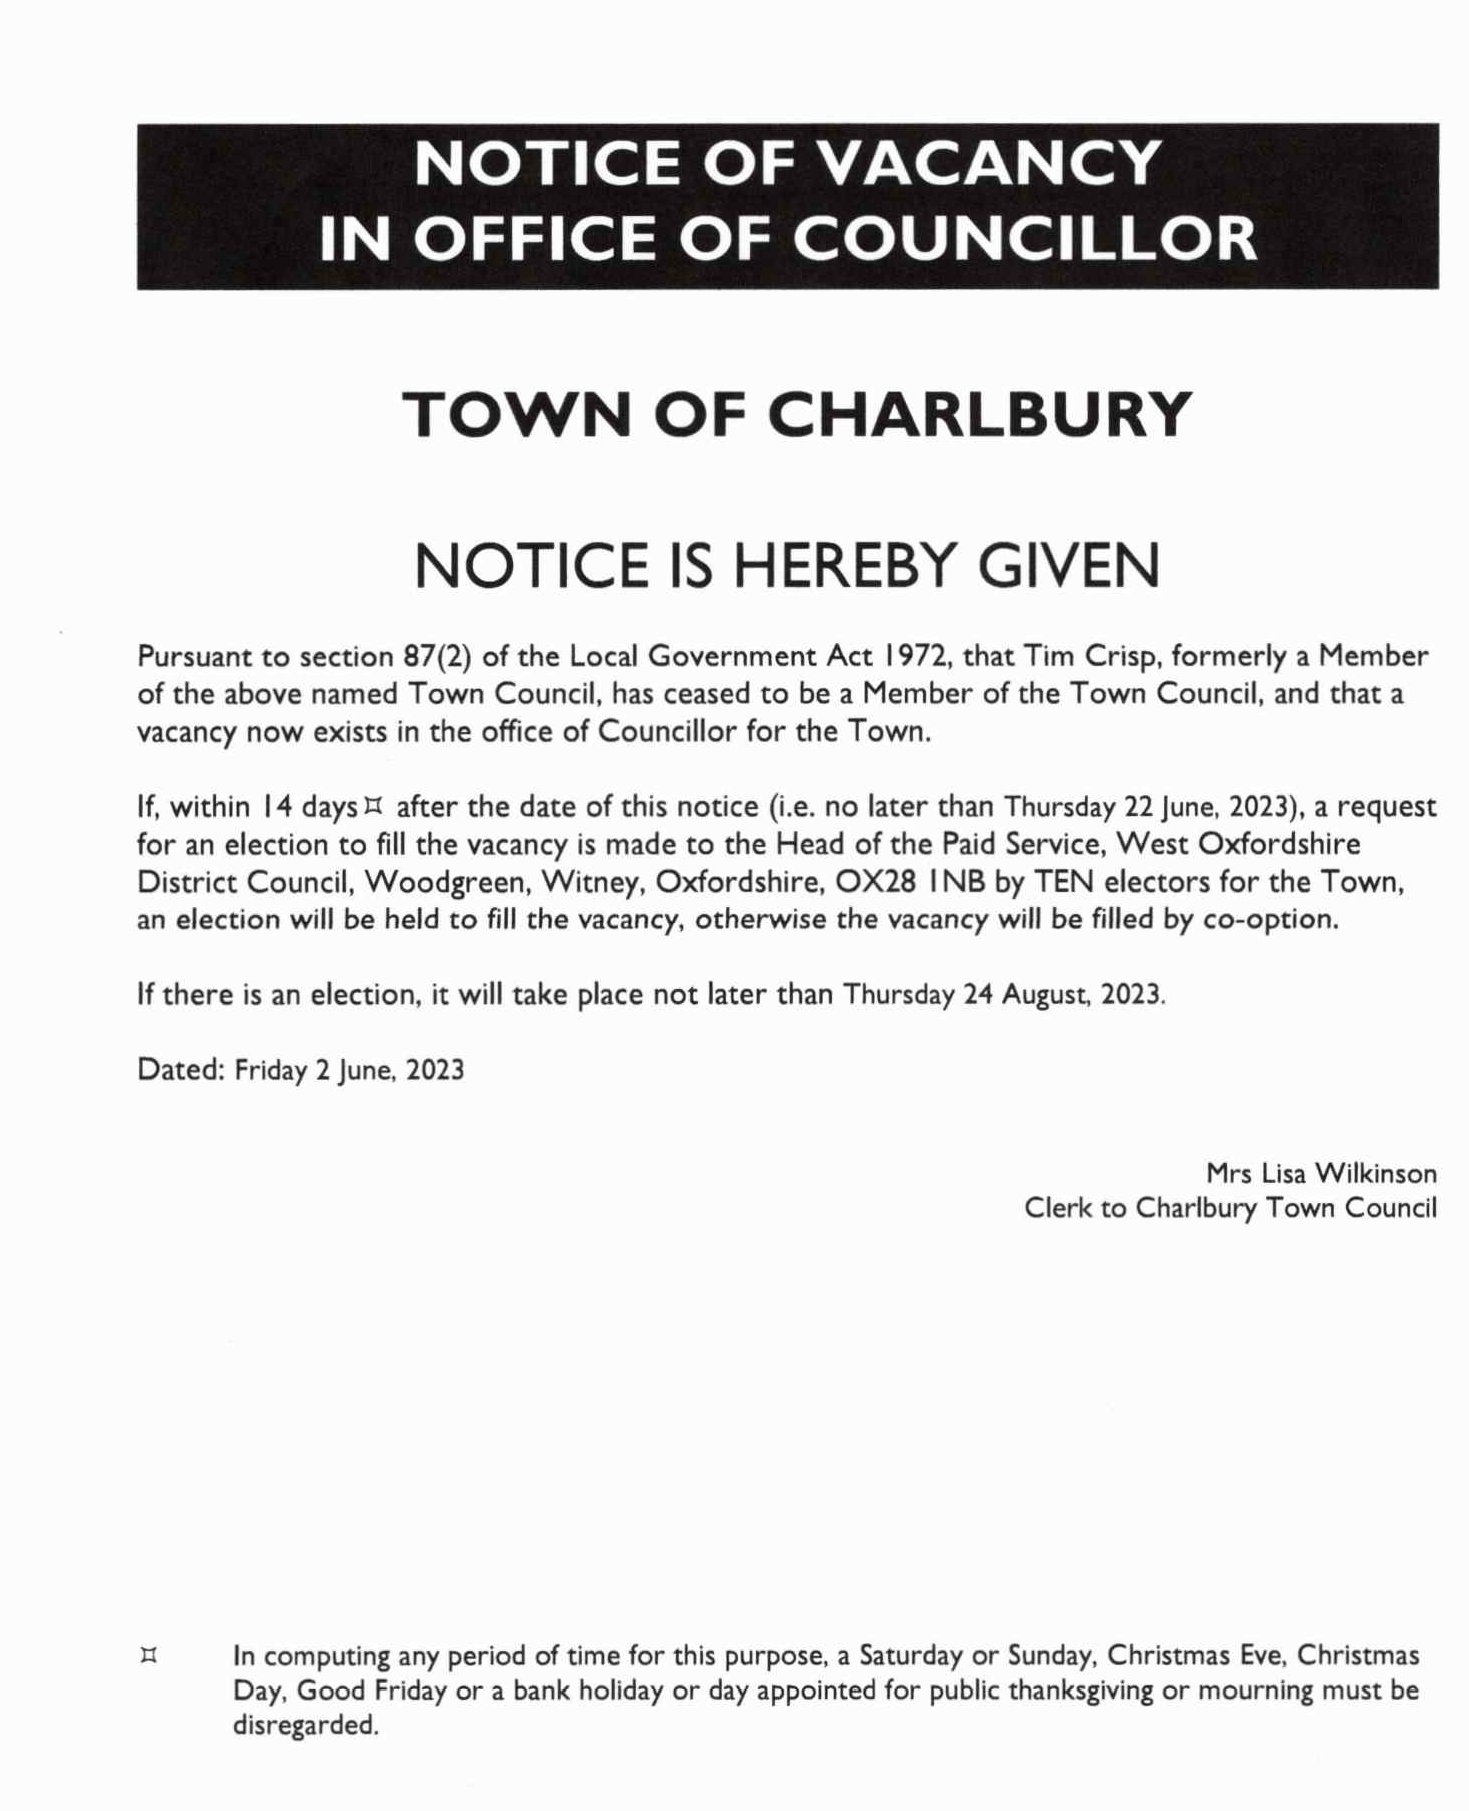 Notice of Vacancy for Town Councillor